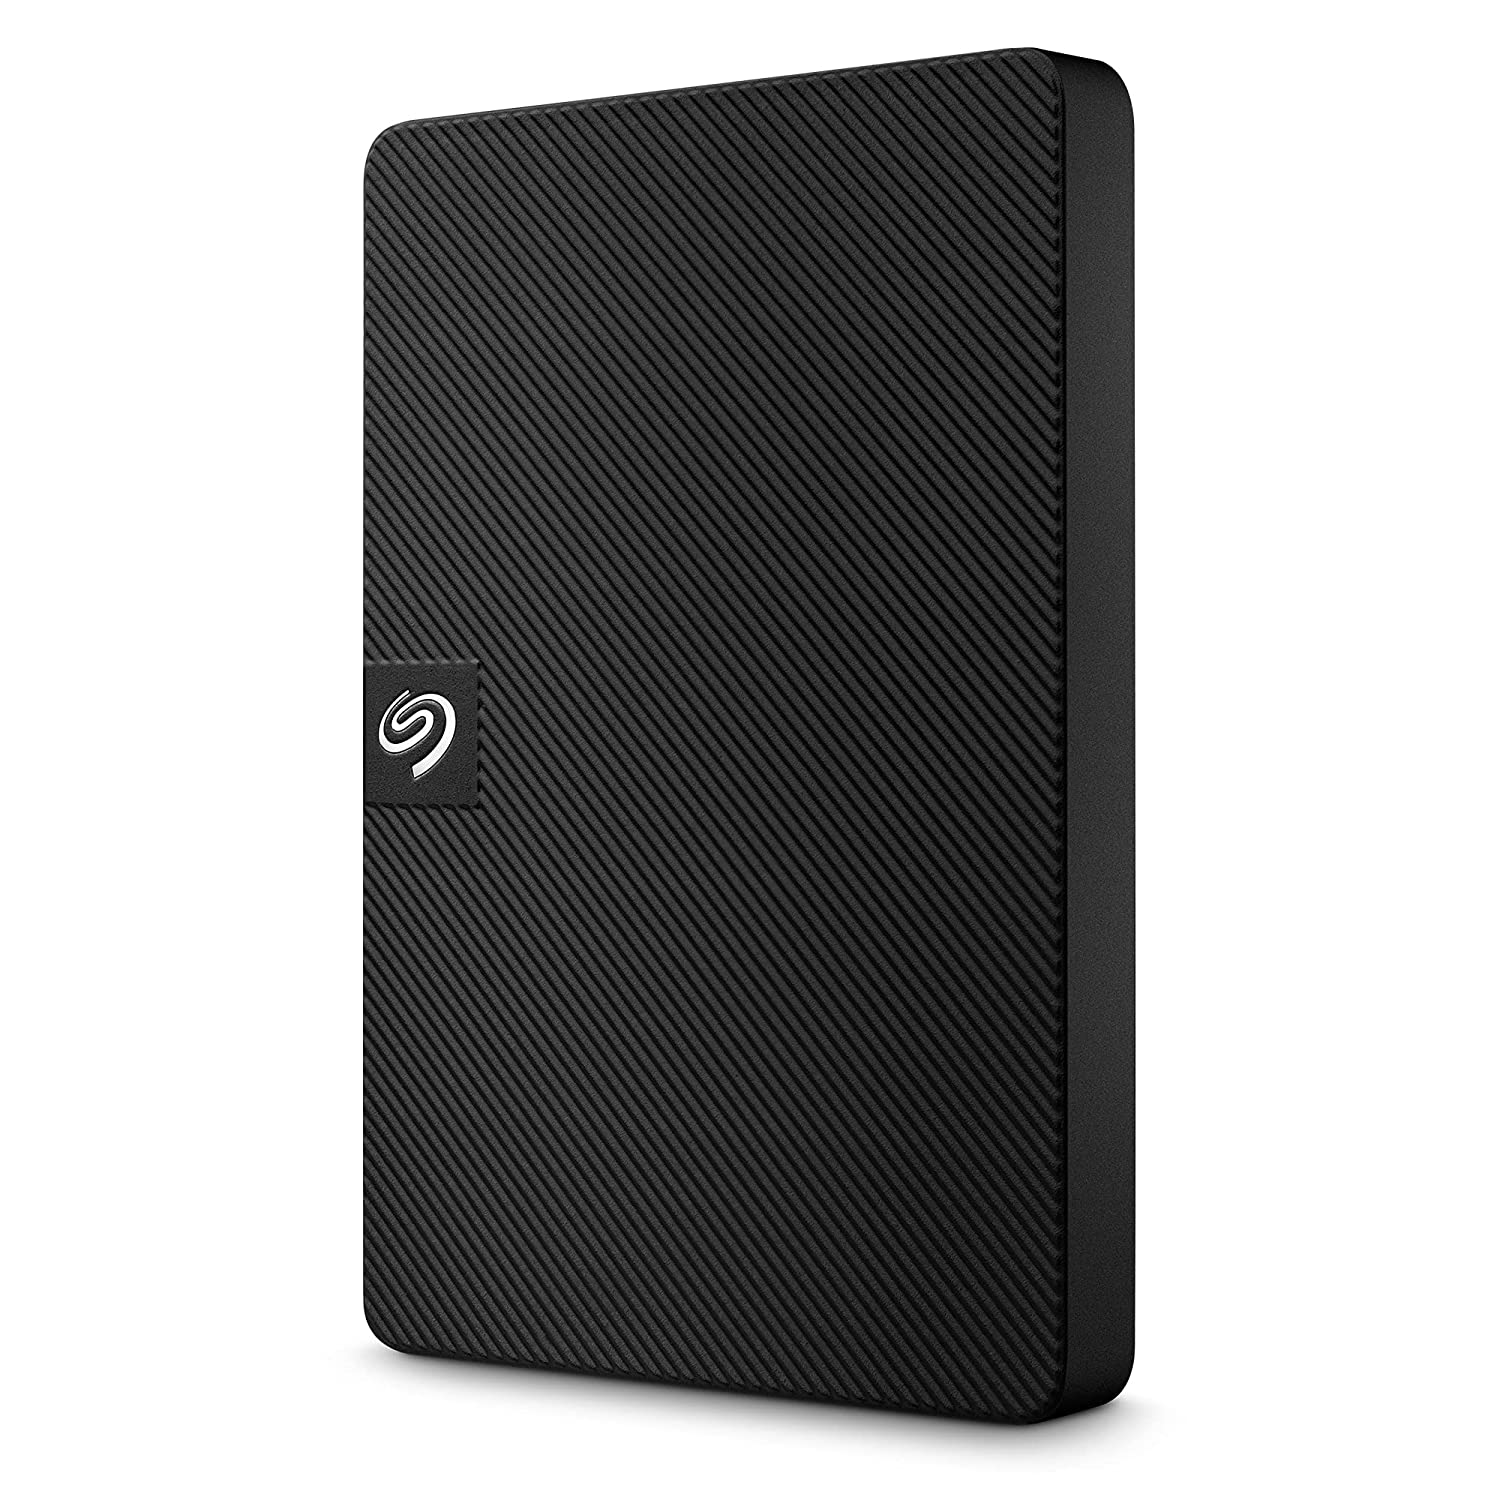 Hard Drive and SSD - Seagate Expansion 2TB External HDD - USB 3.0 for Windows and Mac - Portable Hard Drive